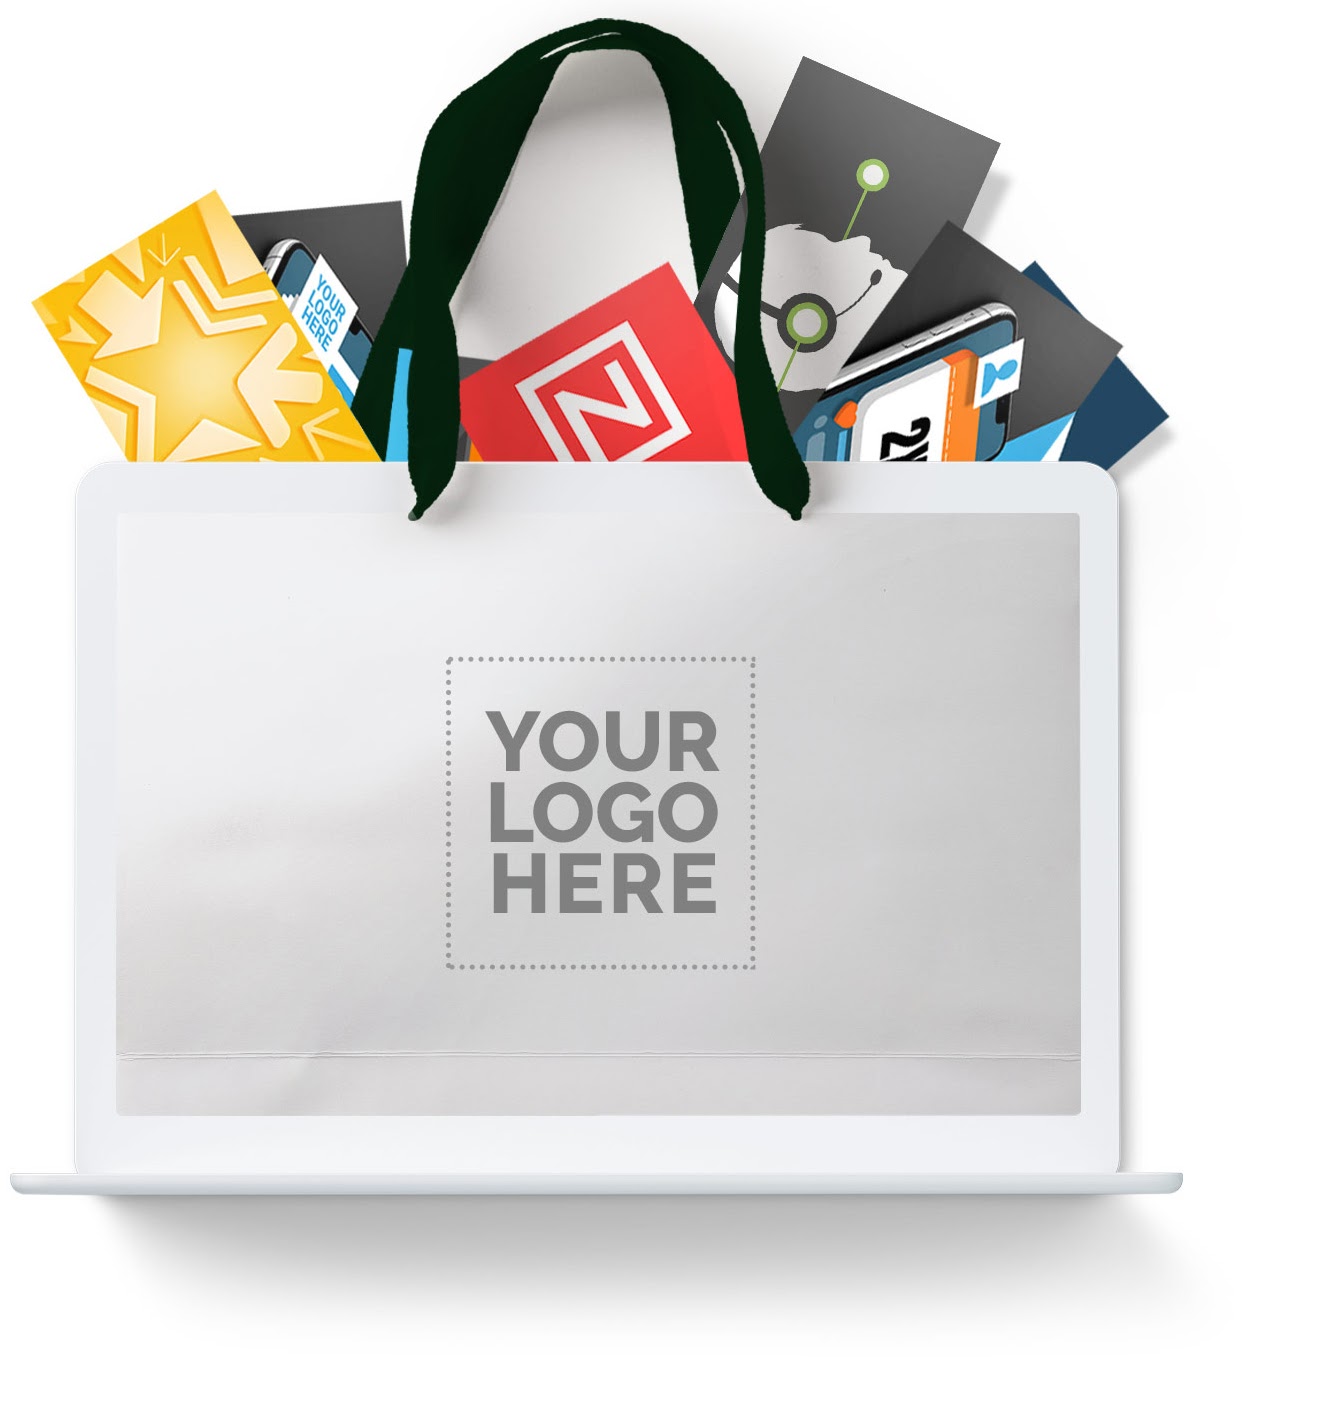 A white-labeled shopping bag filled with software products and marked as “your logo here.”